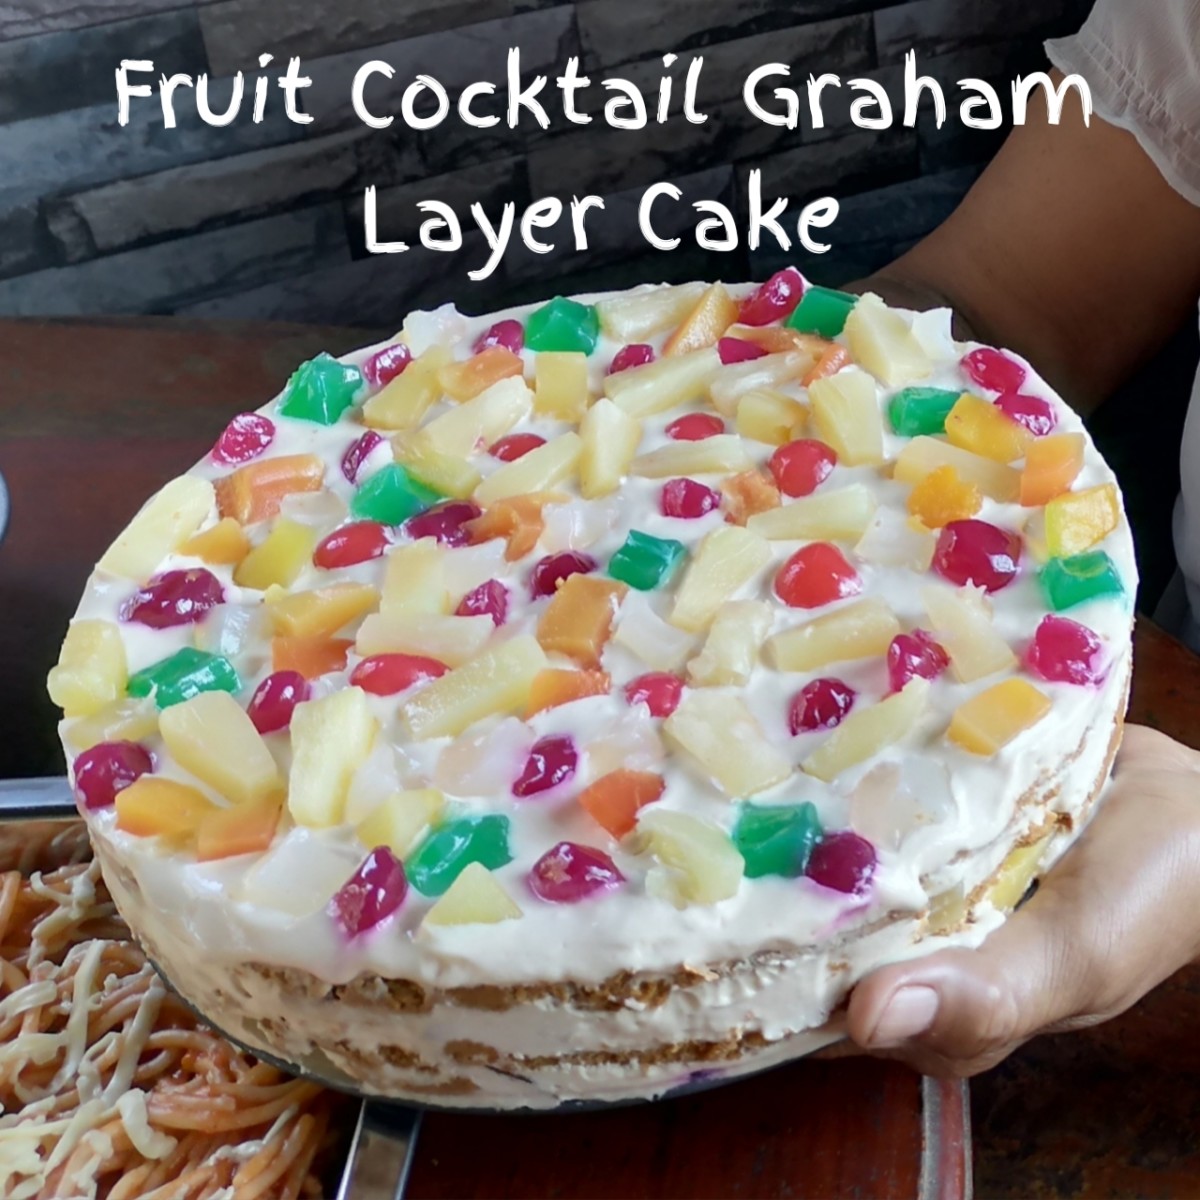 There's no need to turn on the oven for this fruit cocktail graham layer cake!